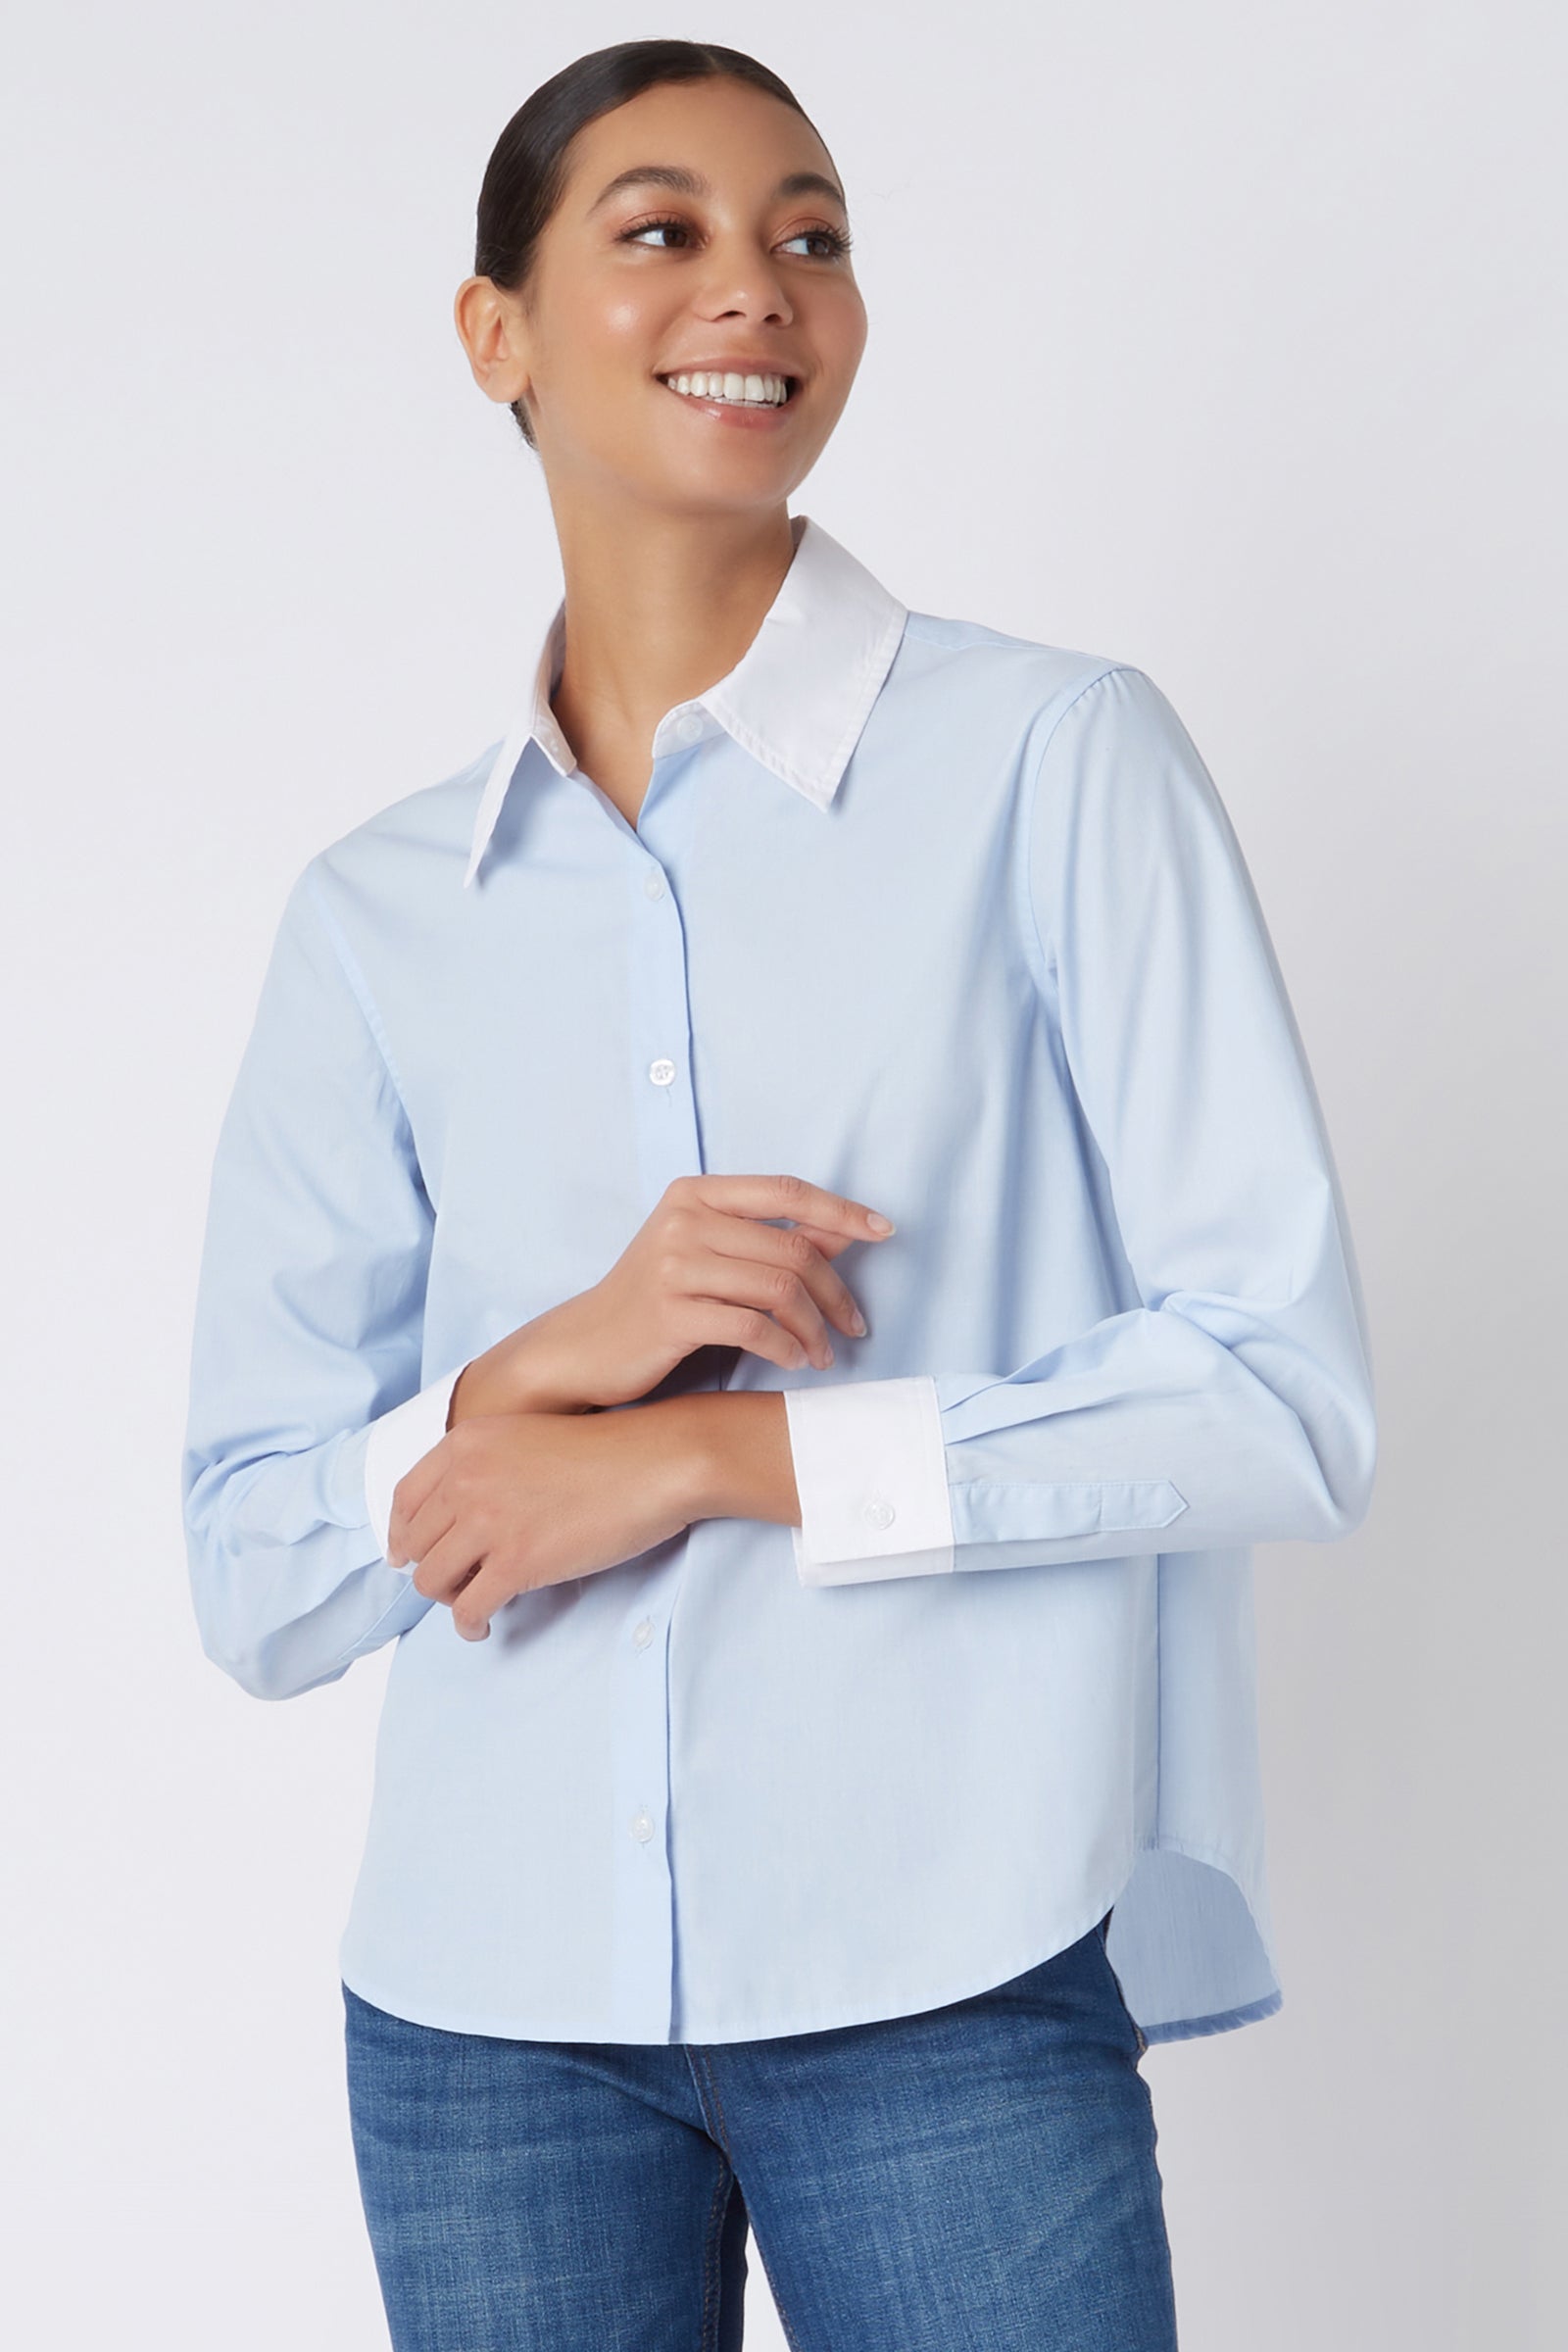 Kal Rieman Classic Tailored Shirt in Oxford Blue on Model Looking Left Cropped Front View